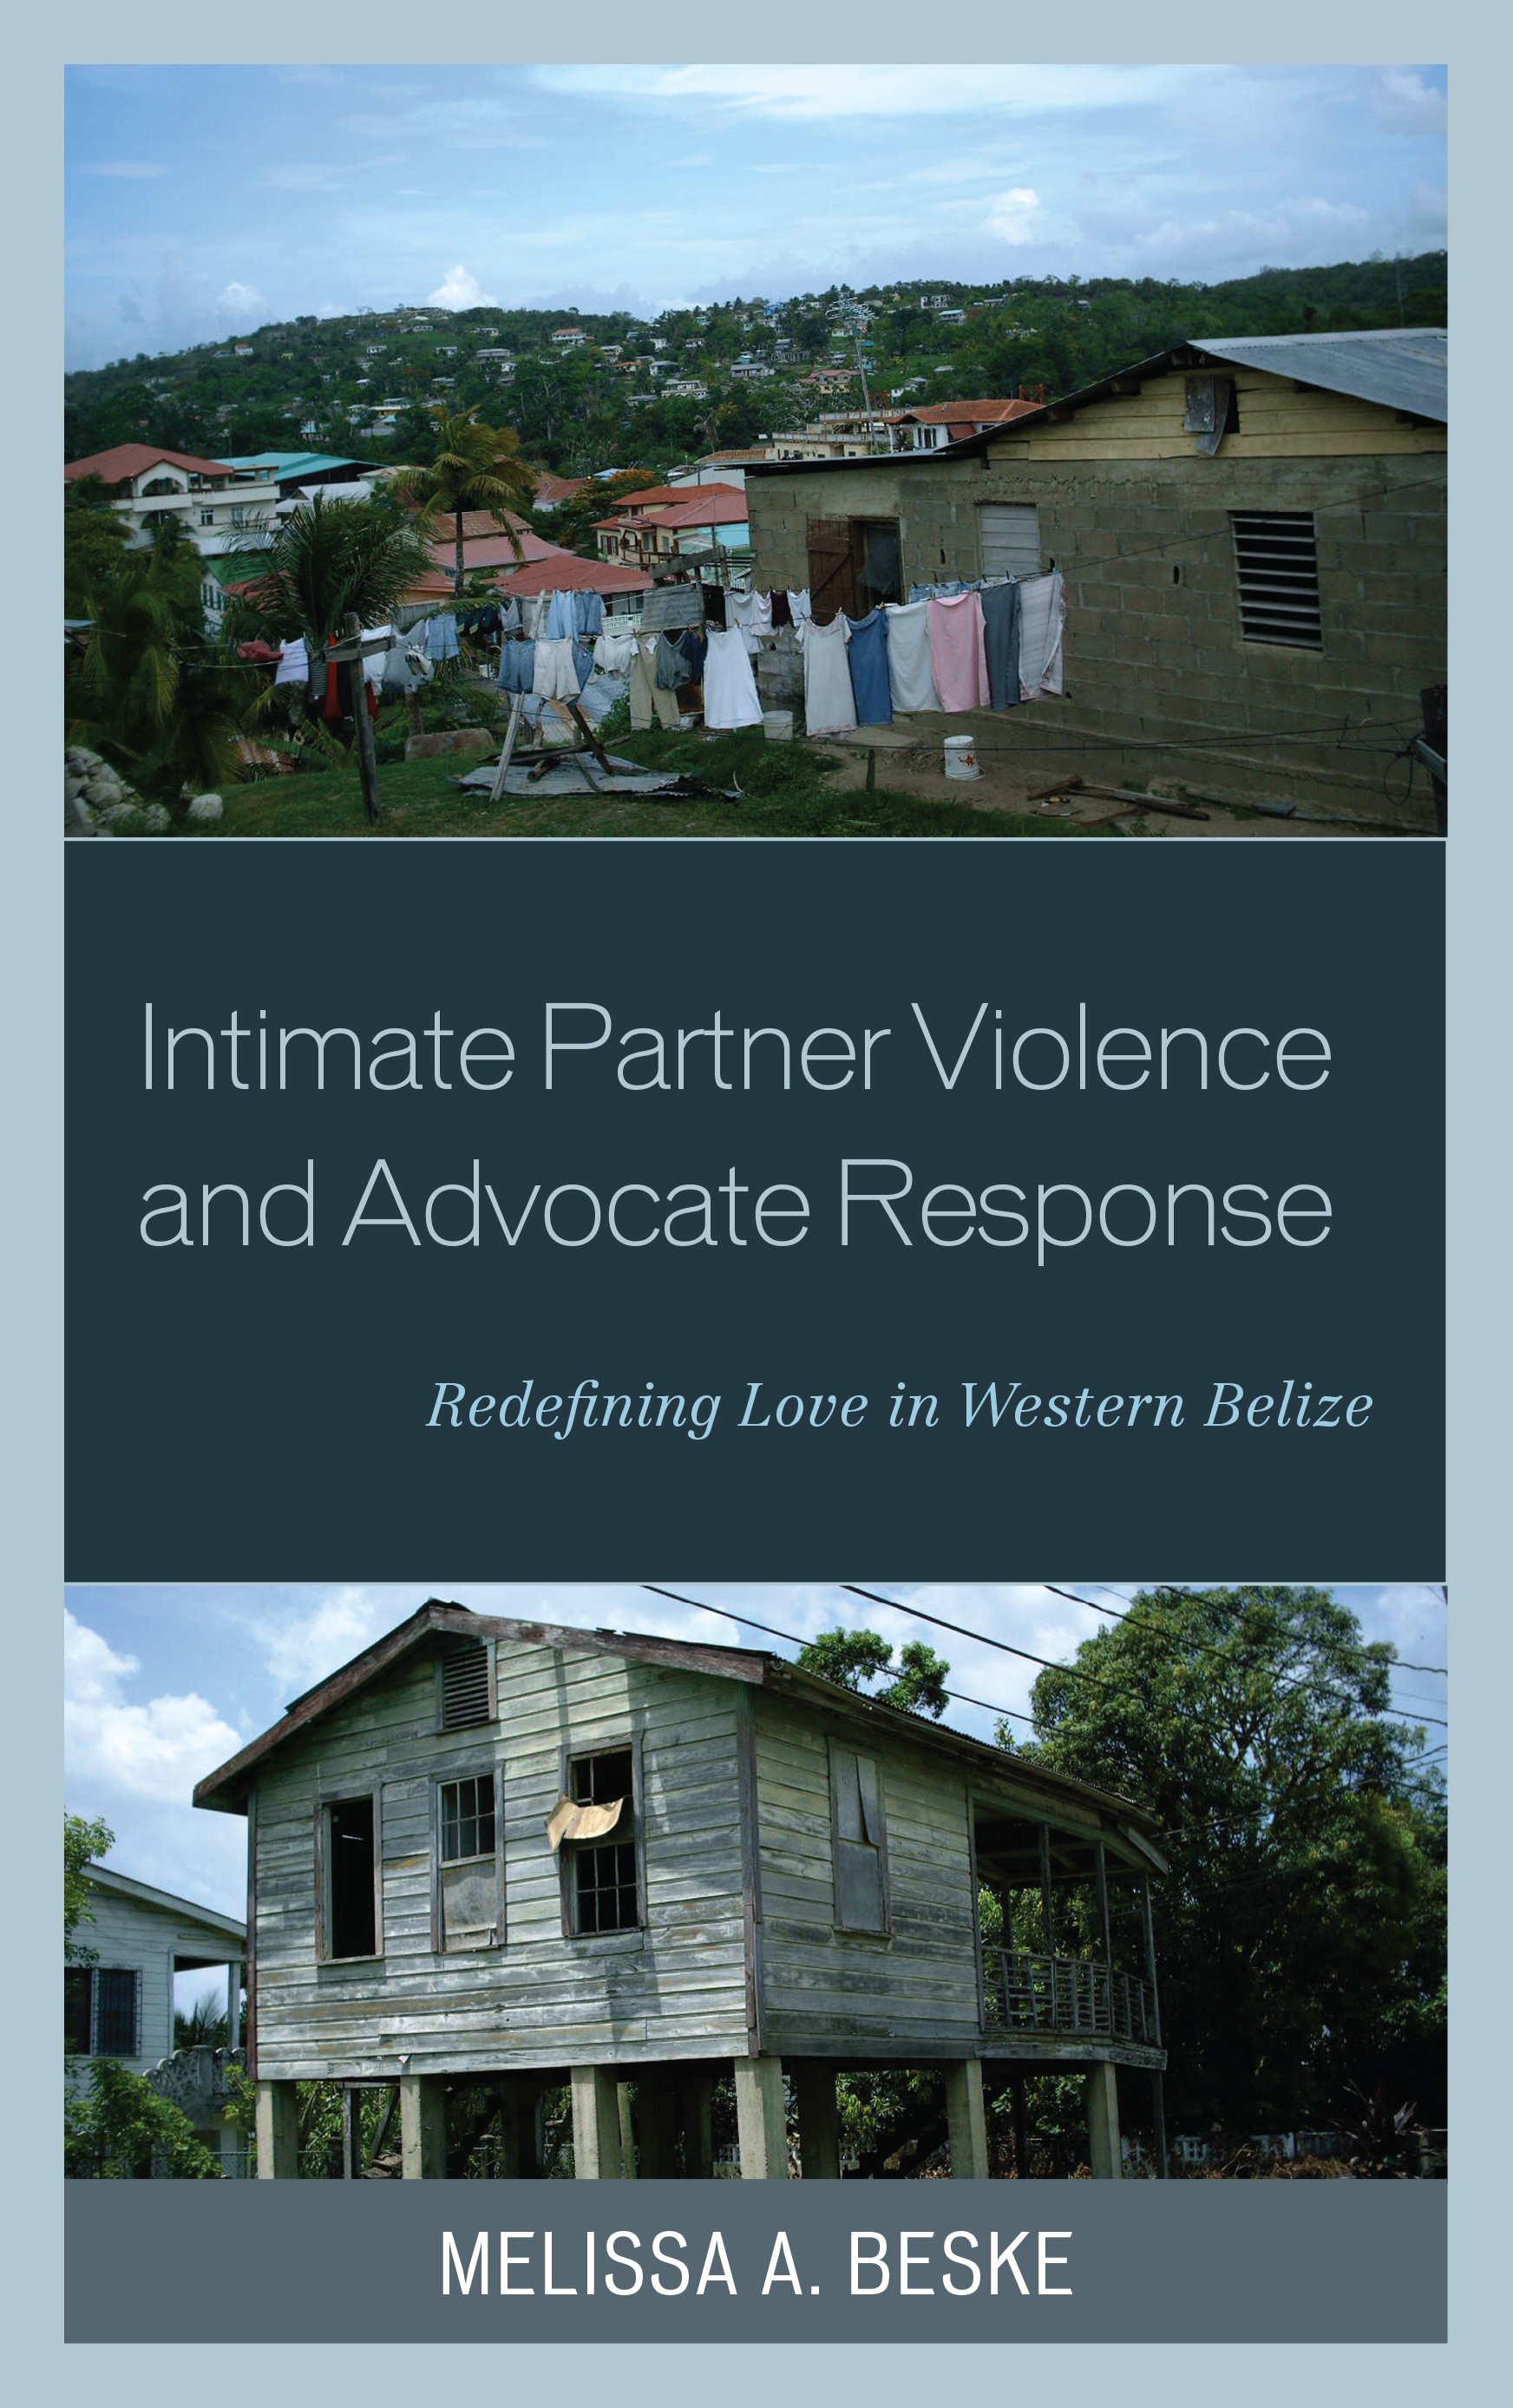 Intimate Partner Violence and Advocate Response: Redefining Love in Western Belize